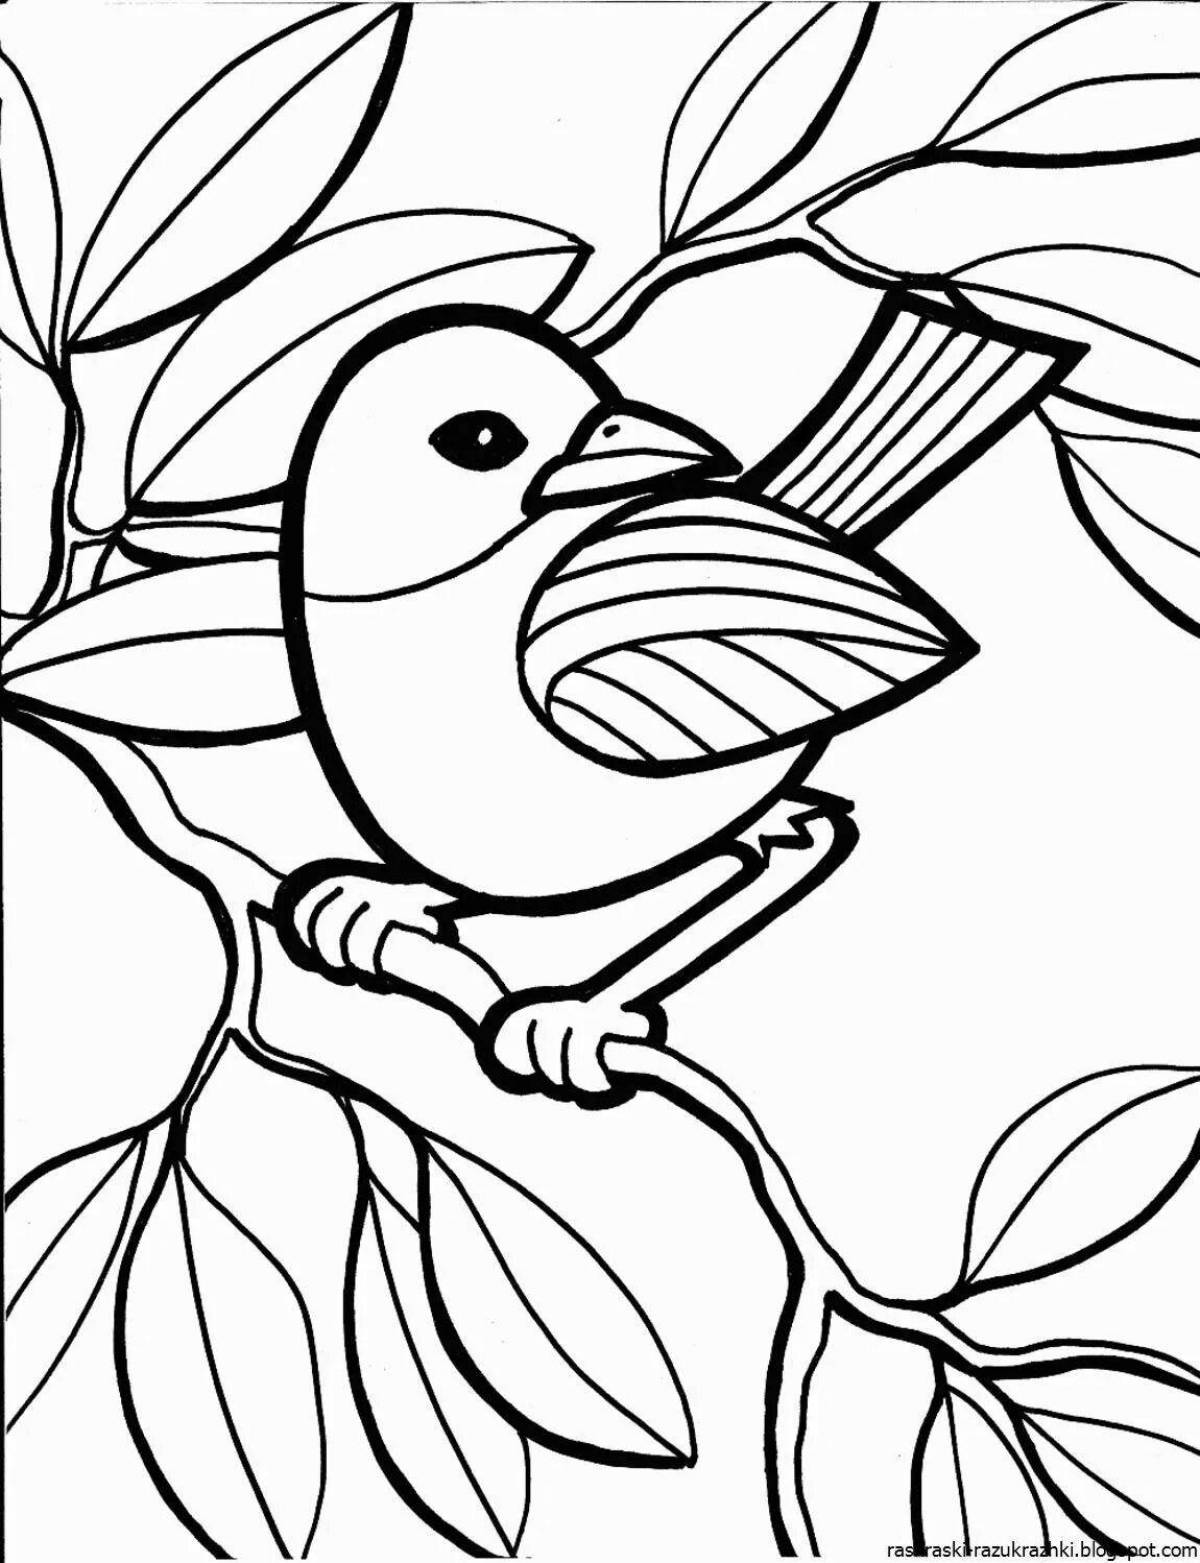 Exquisite bird coloring page for kids